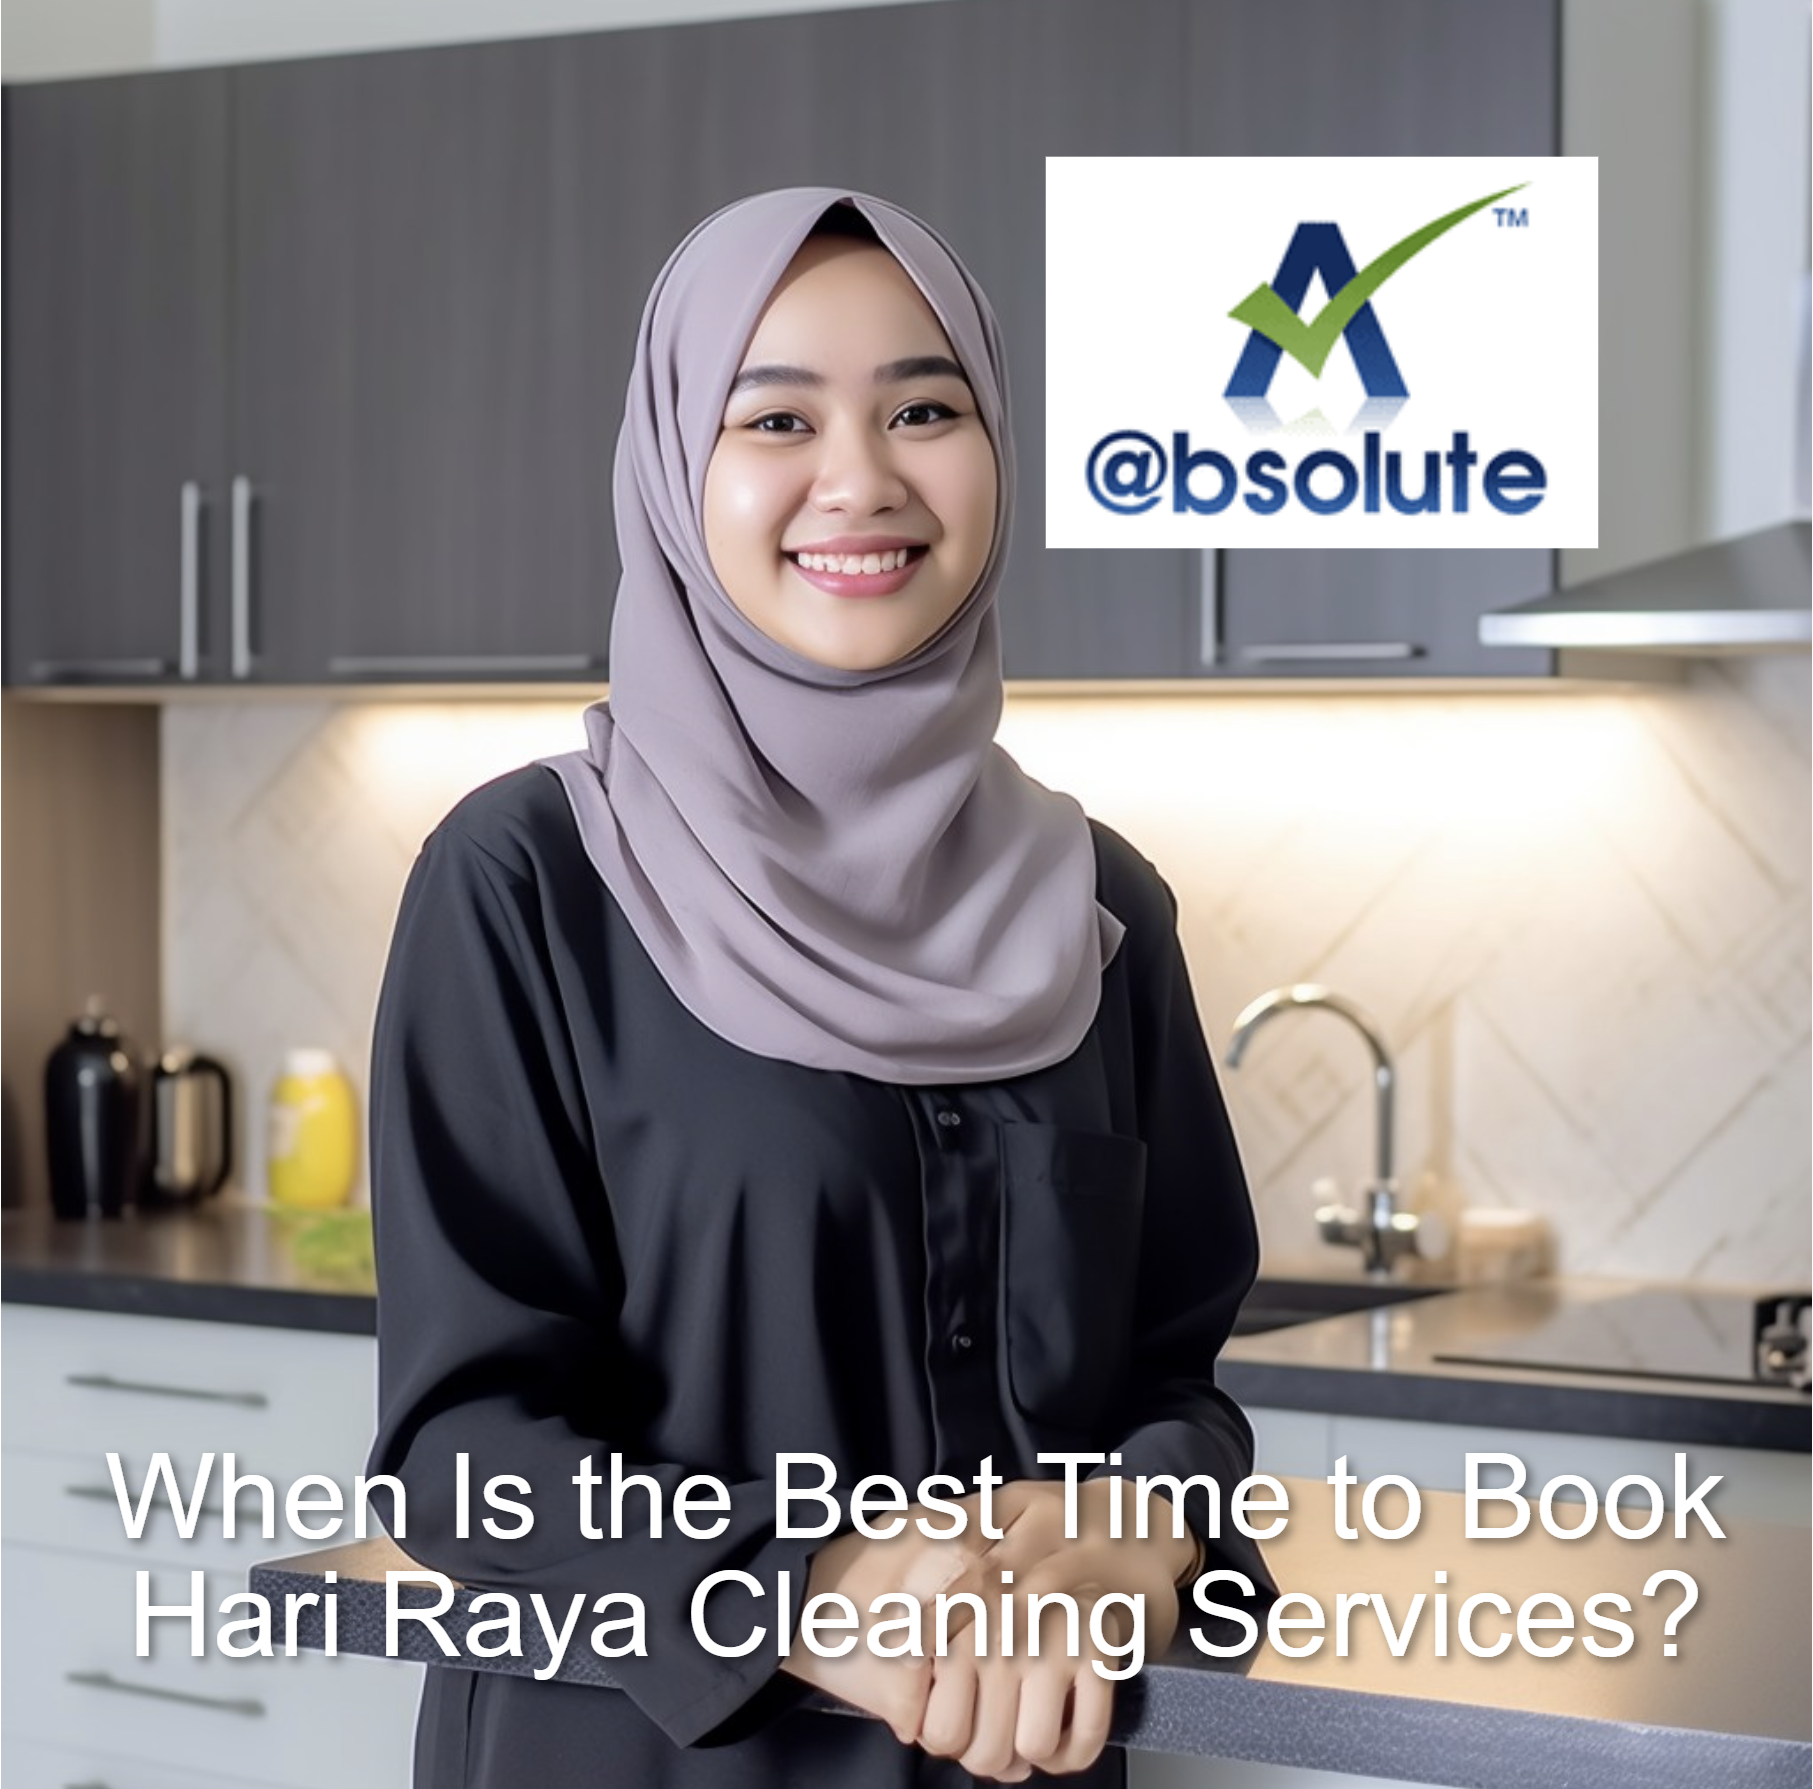 When Is the Best Time to Book Hari Raya Cleaning Services